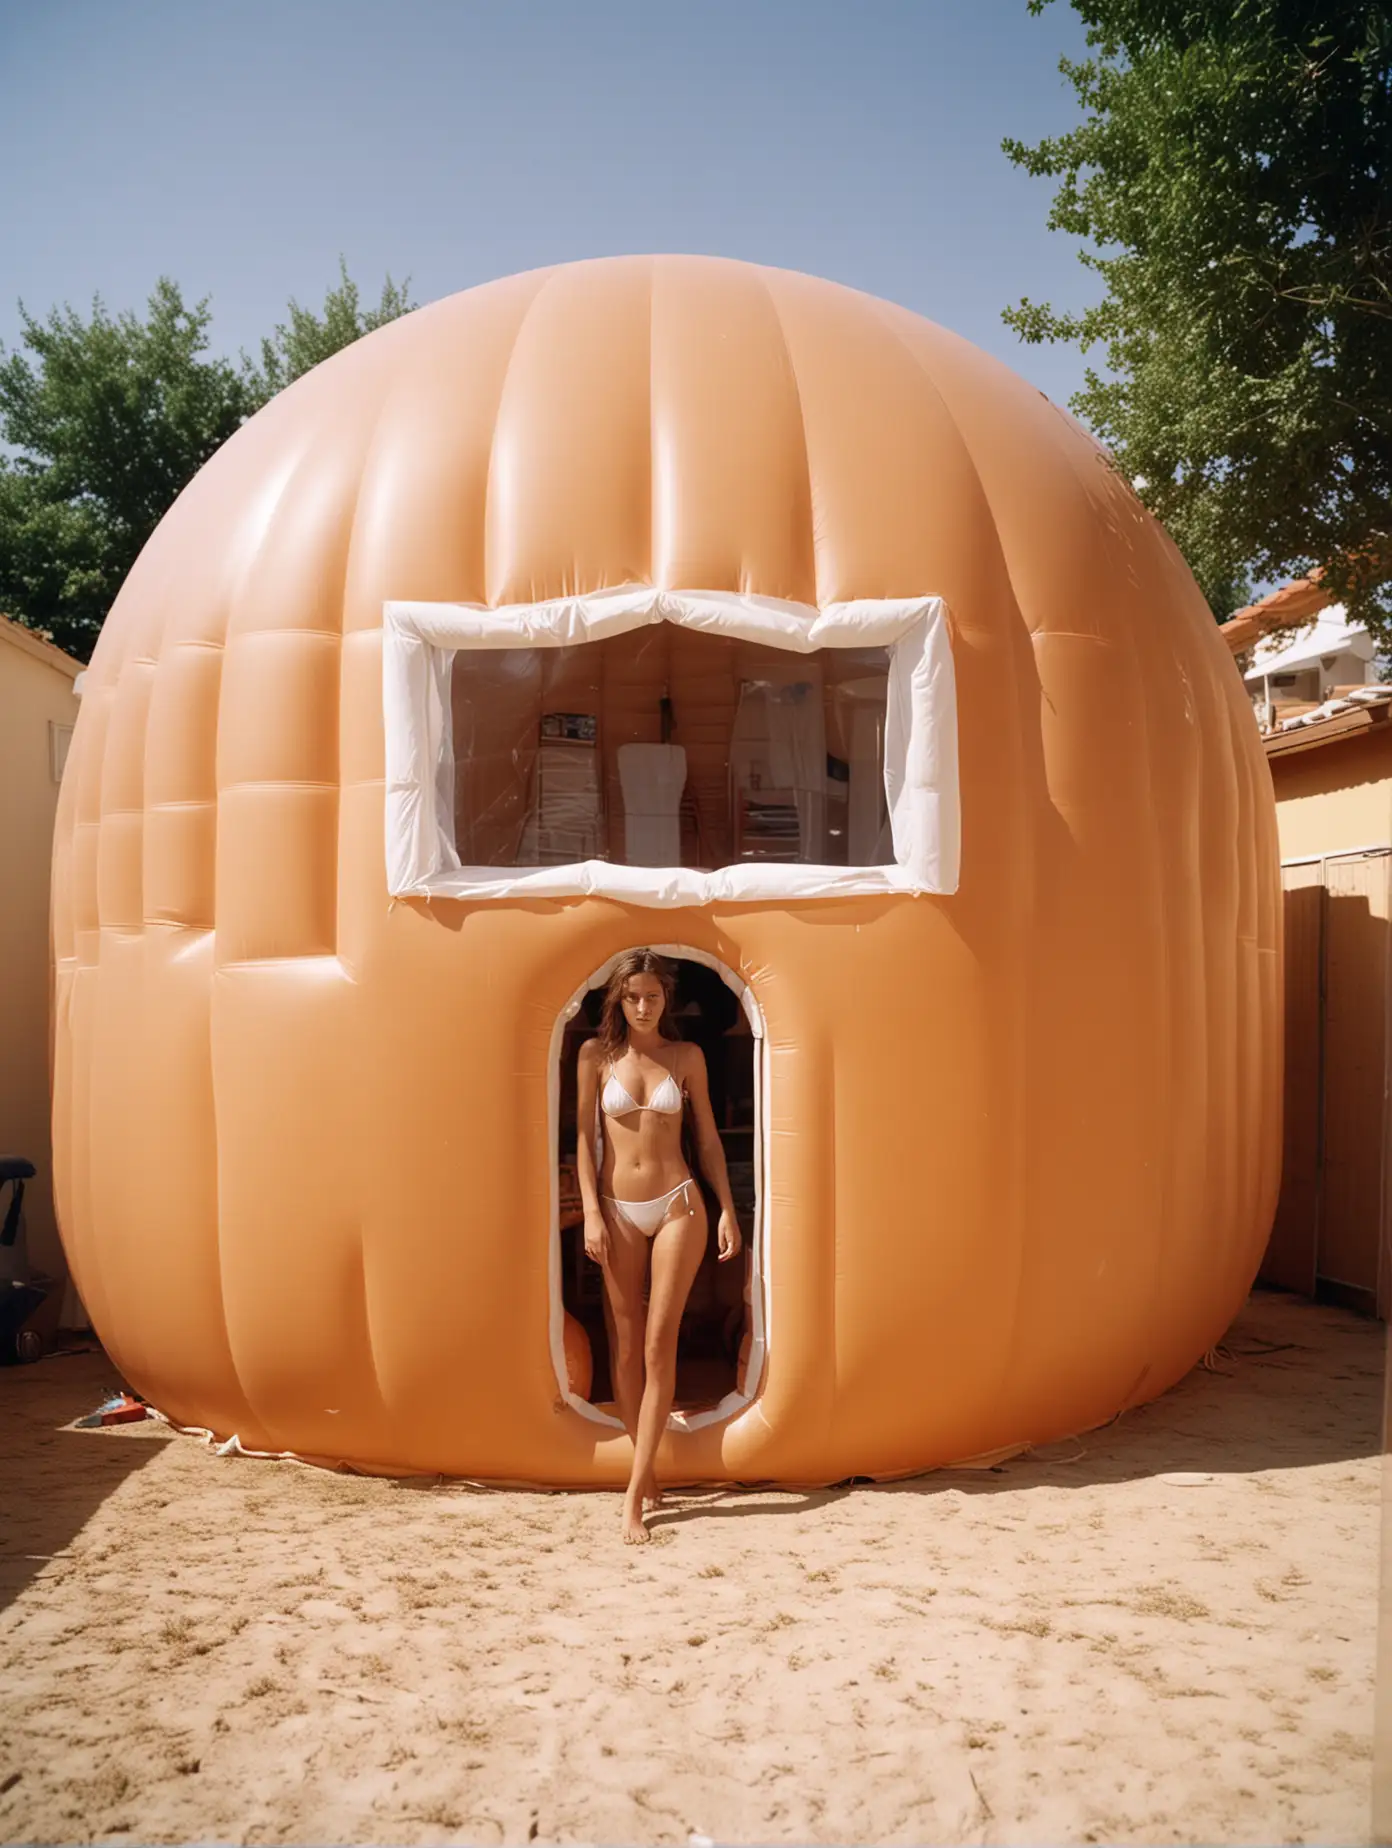 place a tanned model inside an inflatable house, shot taken with leica m6, camera roll portra 400